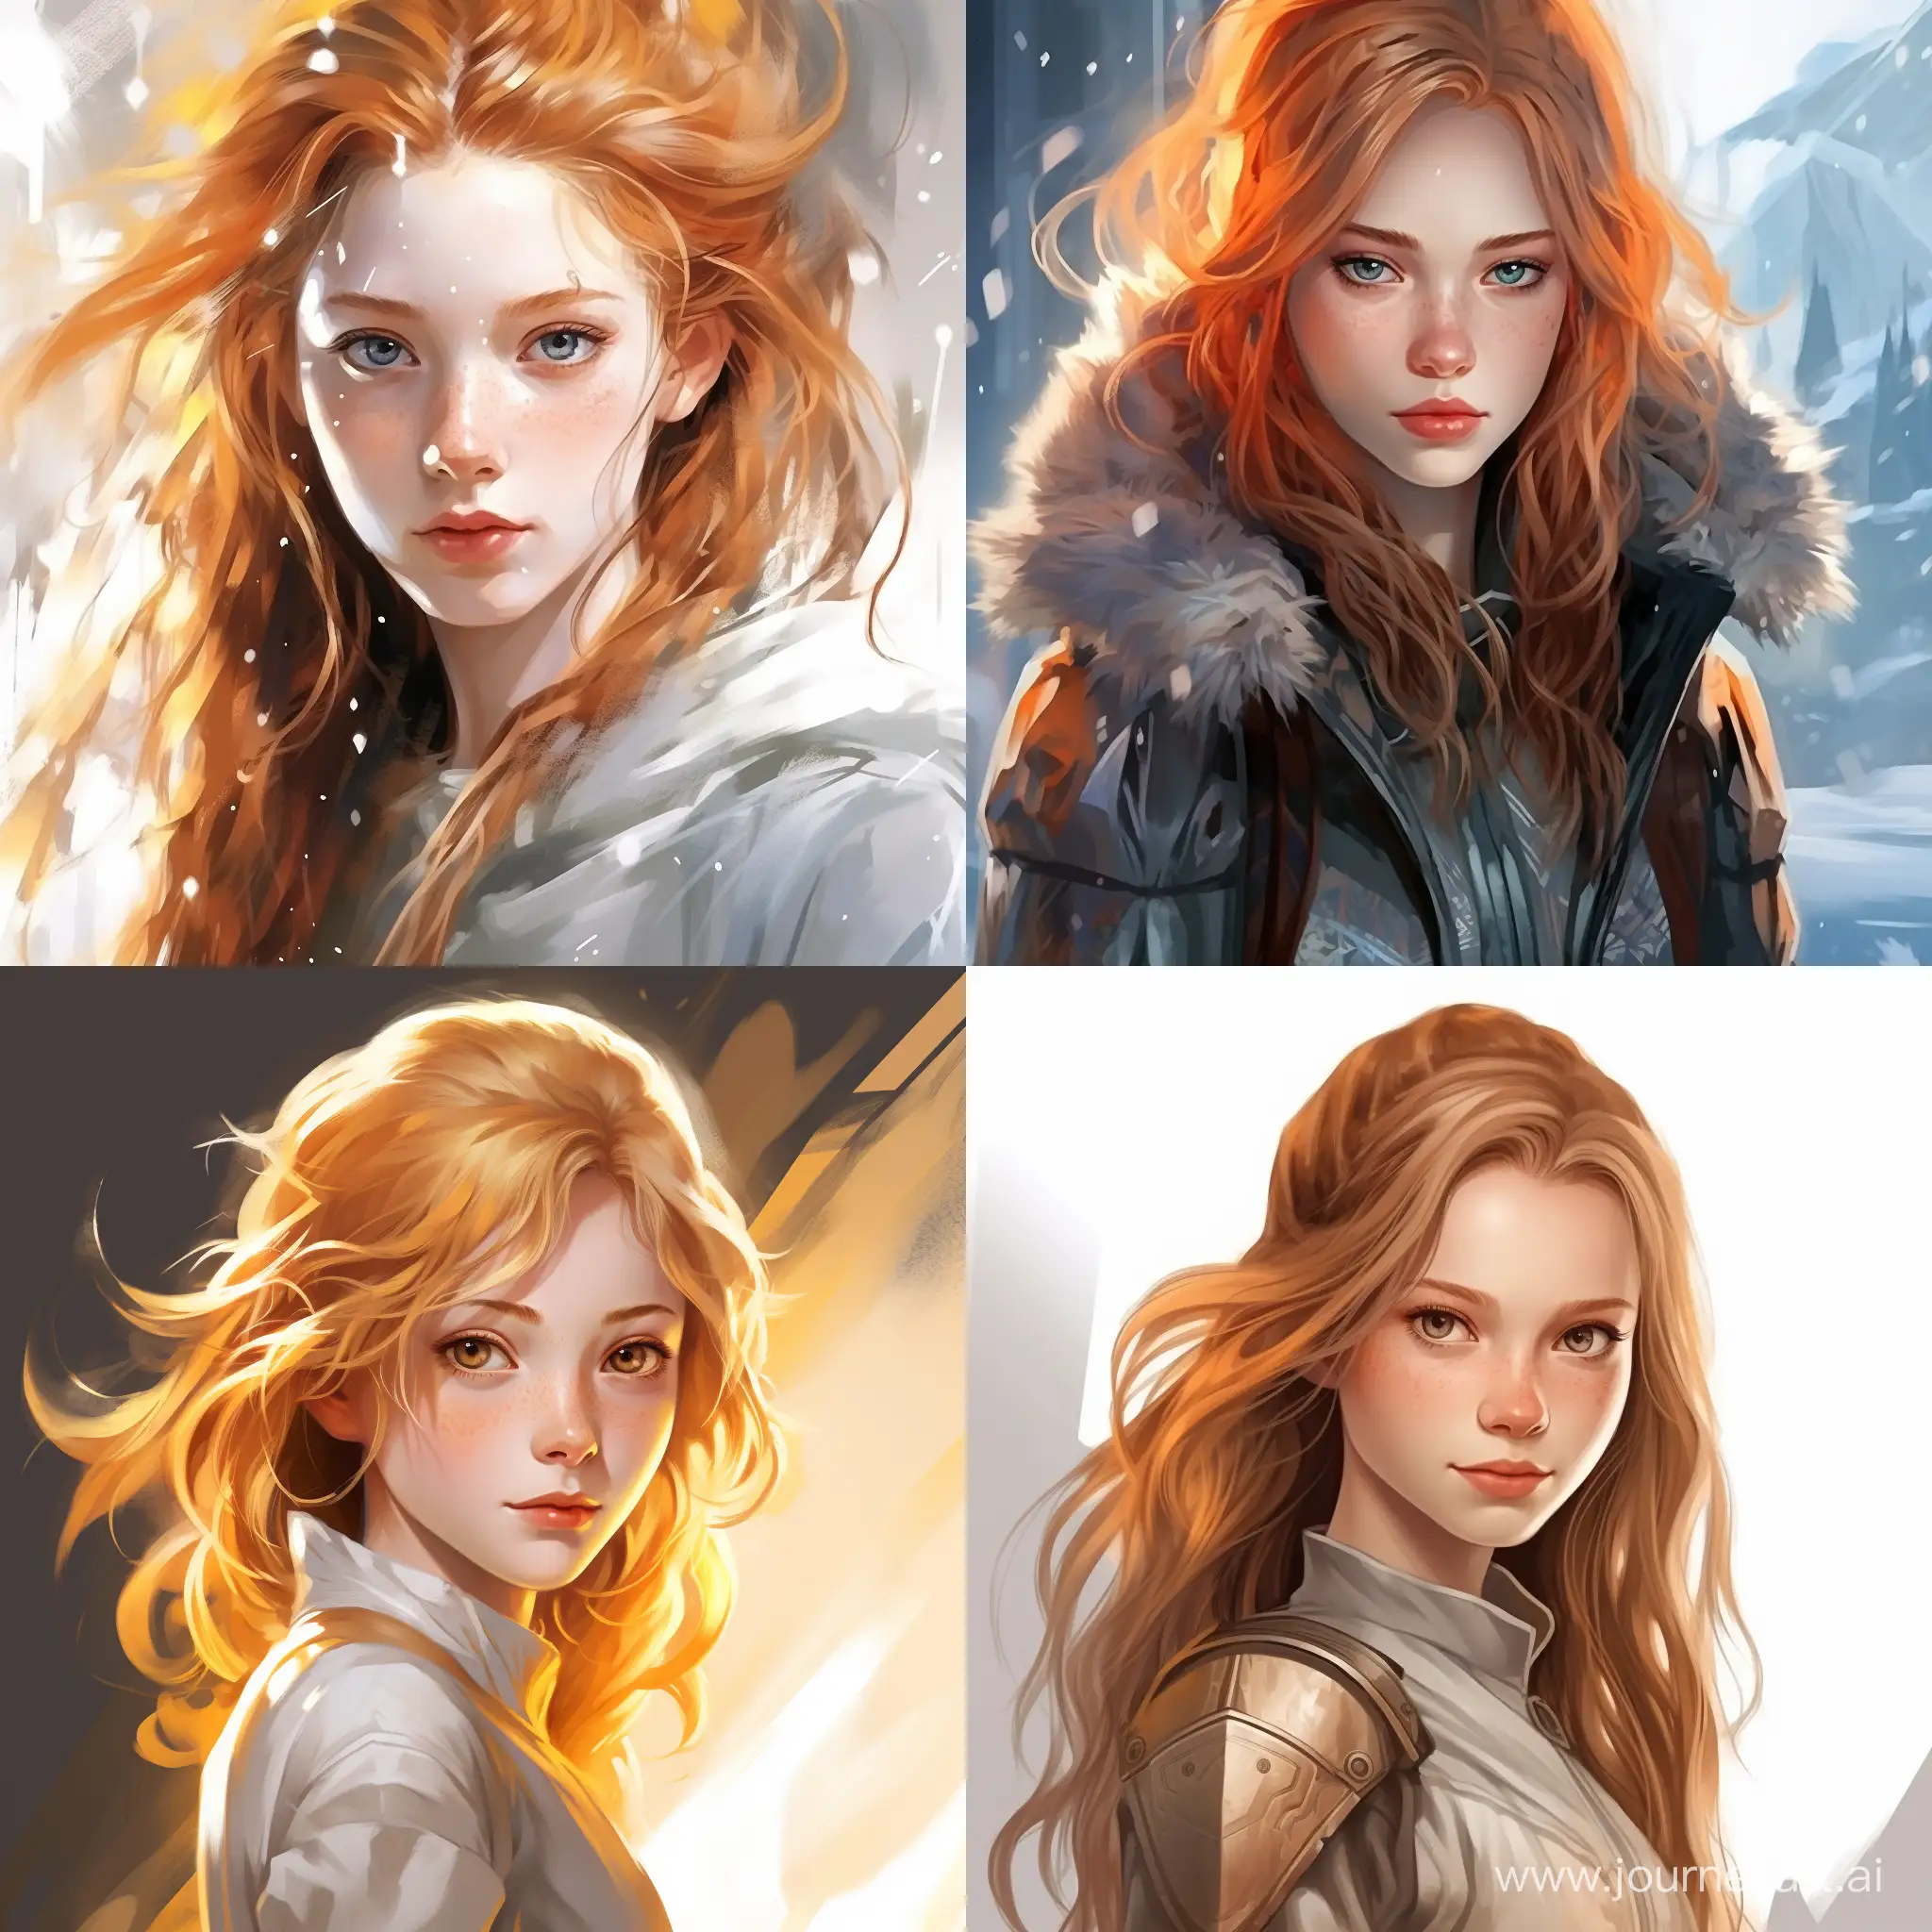 Beautiful girl, golden hair, gray-blue eyes, snow-white skin, teenager, 14 years old, avatar style legend of aang, high quality, high detail, cartoon art